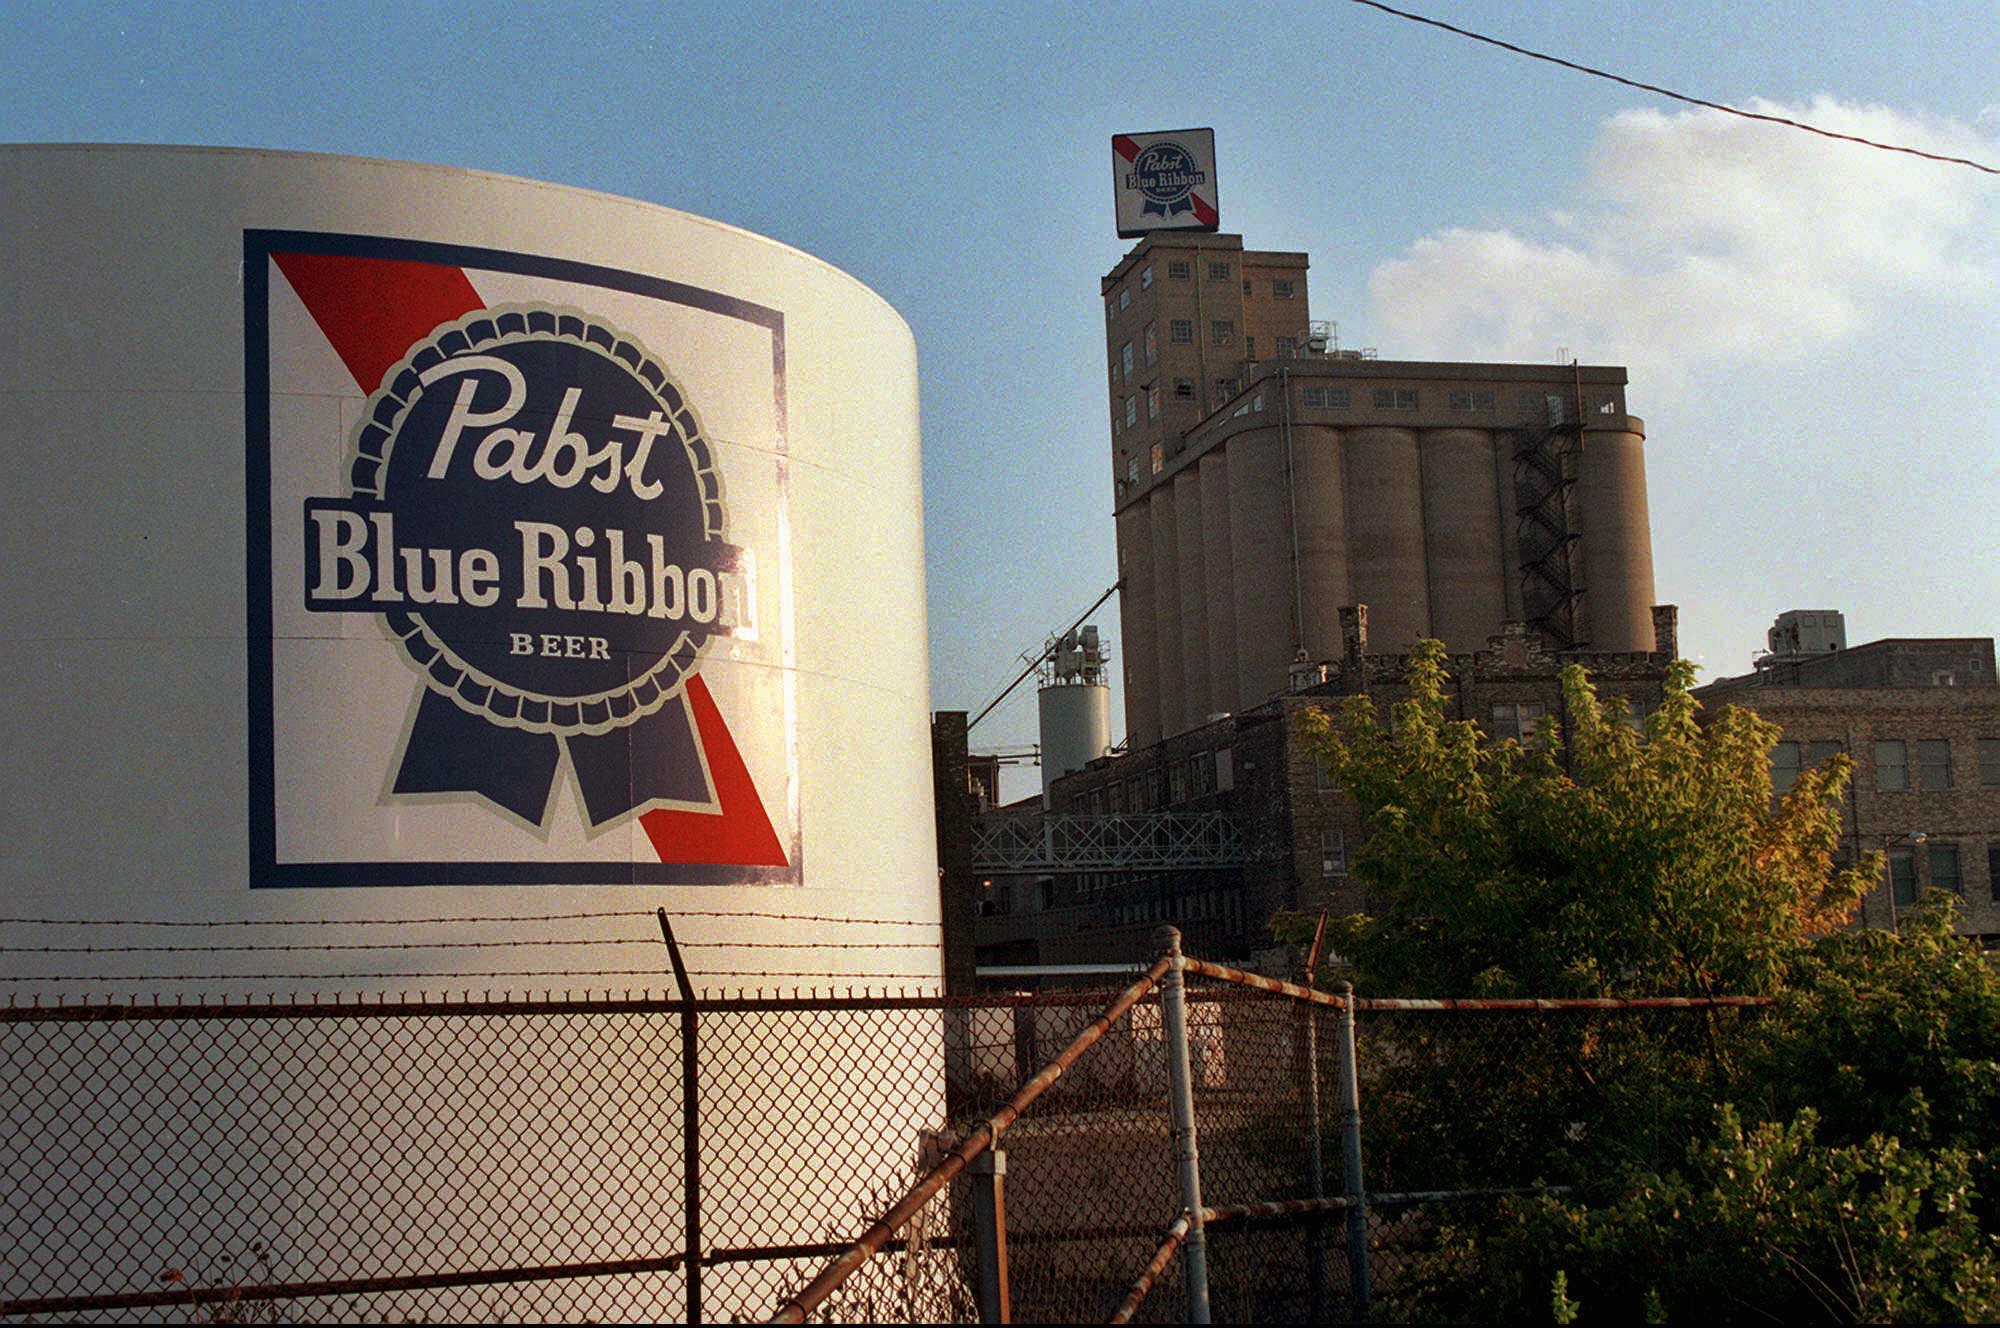 Pabst Brewery Operations Leaving Milwaukee, Again